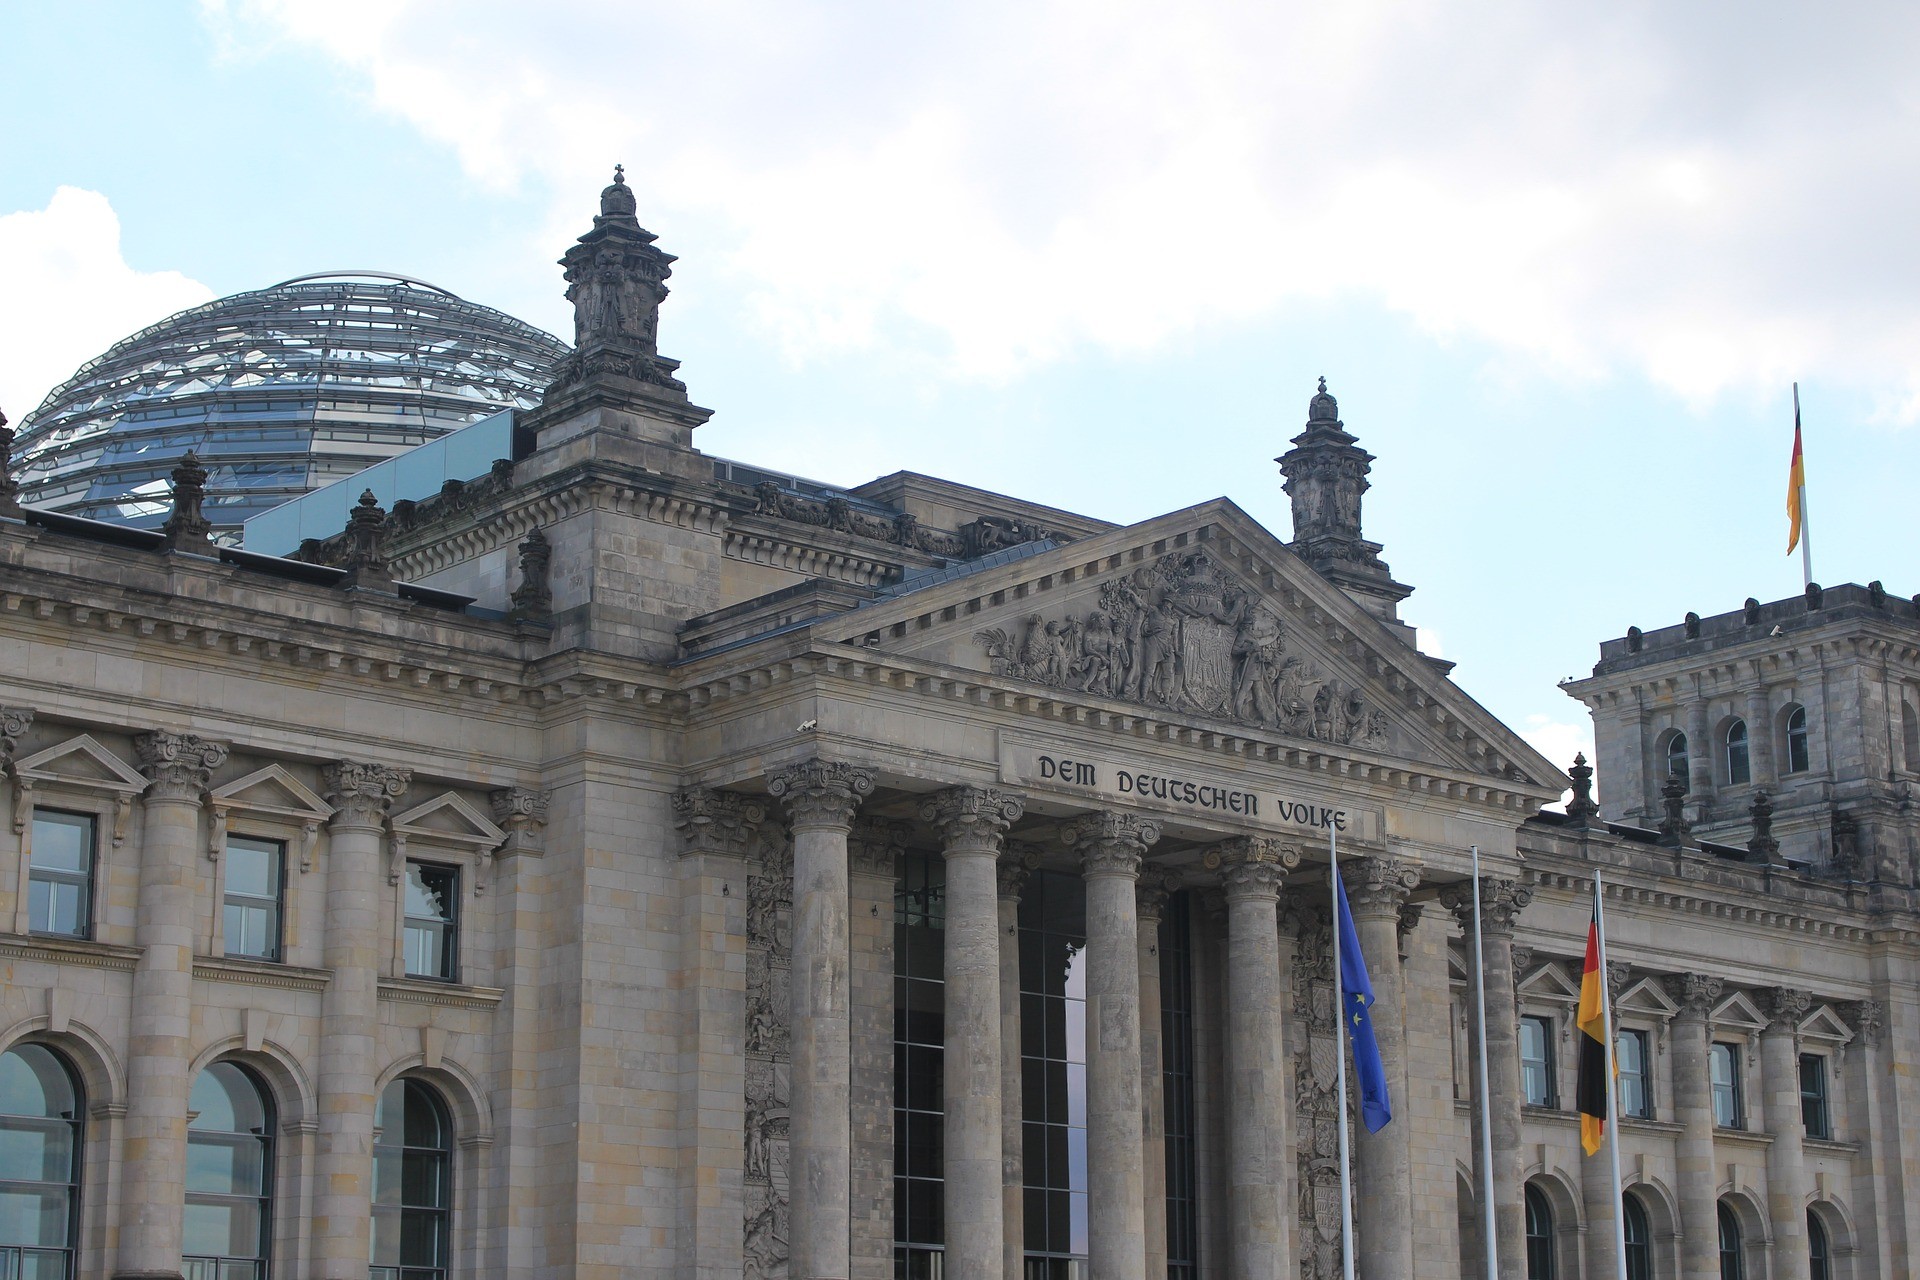 The Reichstag building in berlin